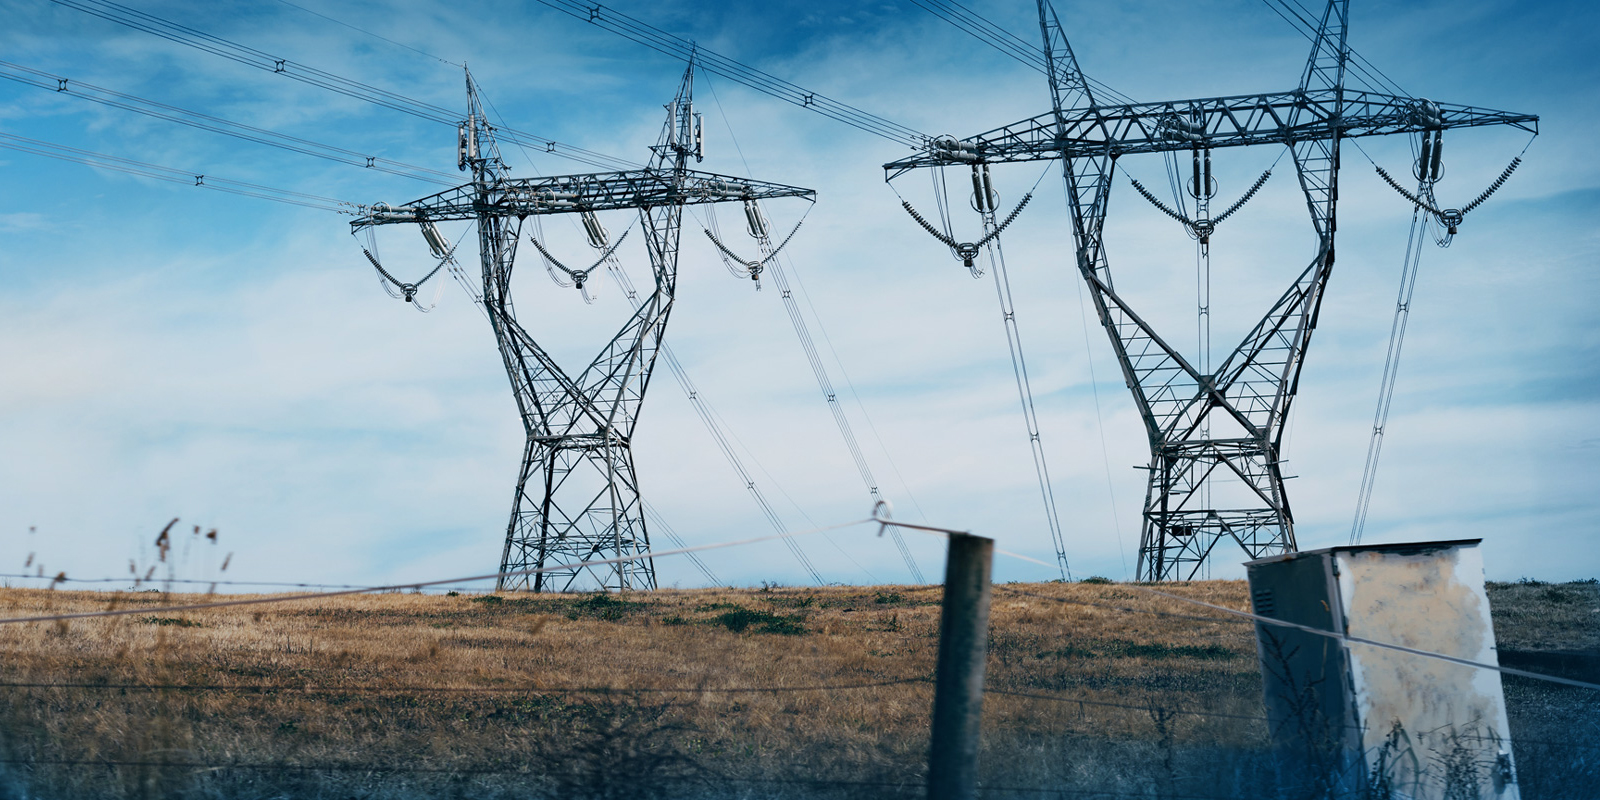 Australian Government Further Tightens FIRB Controls, Now Over Critical Electricity Assets